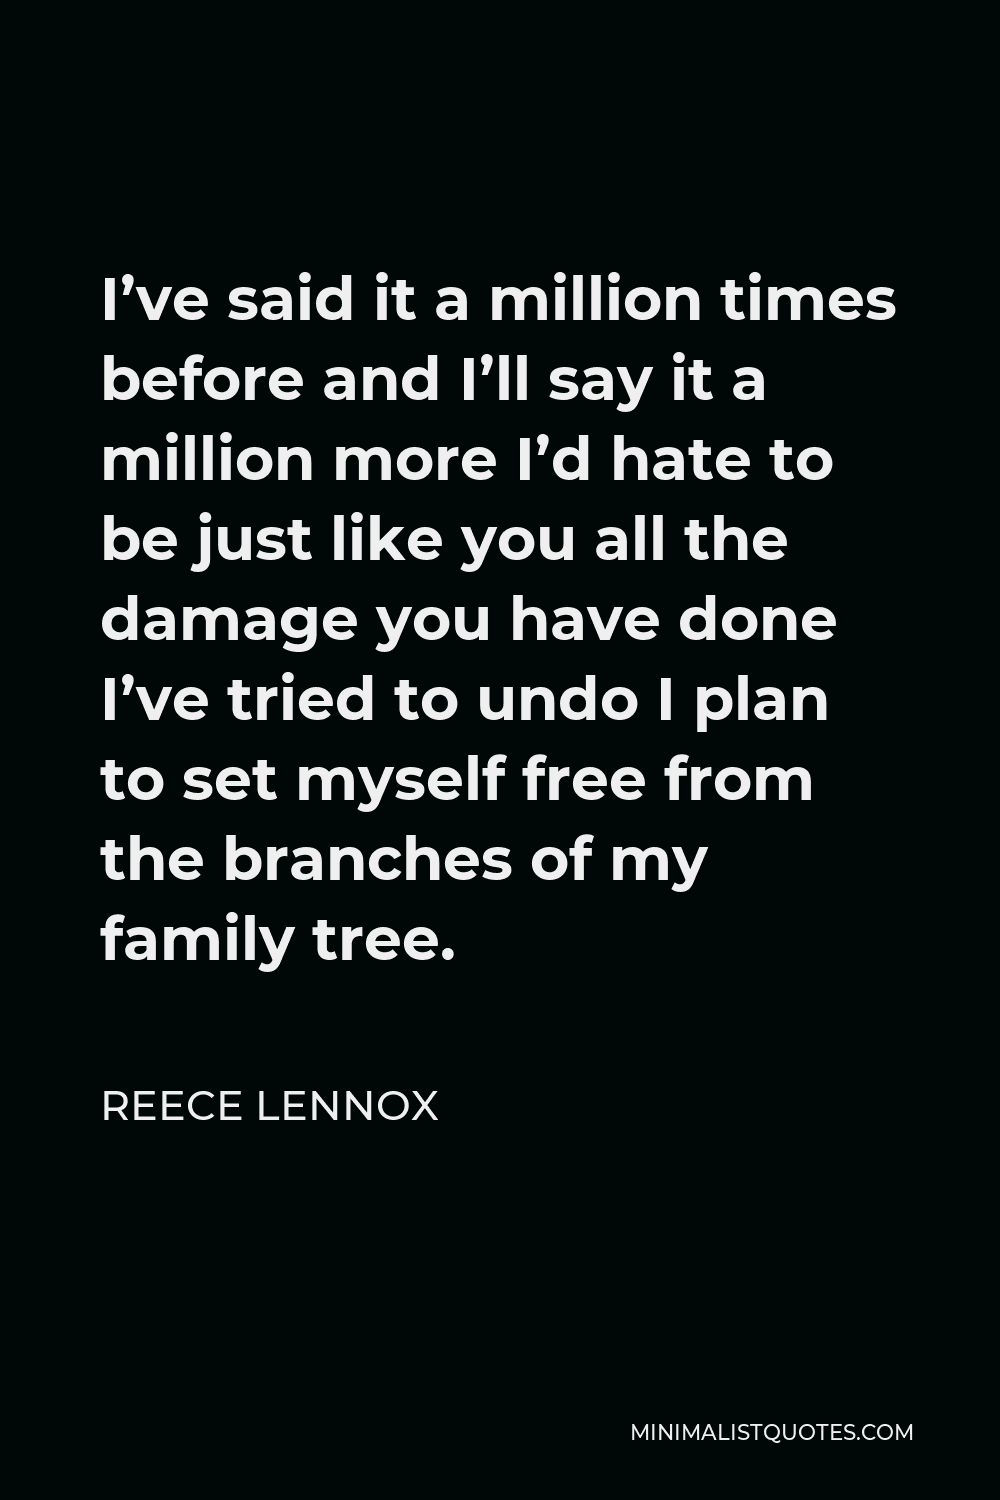 Reece Lennox Quote - I’ve said it a million times before and I’ll say it a million more I’d hate to be just like you all the damage you have done I’ve tried to undo I plan to set myself free from the branches of my family tree.